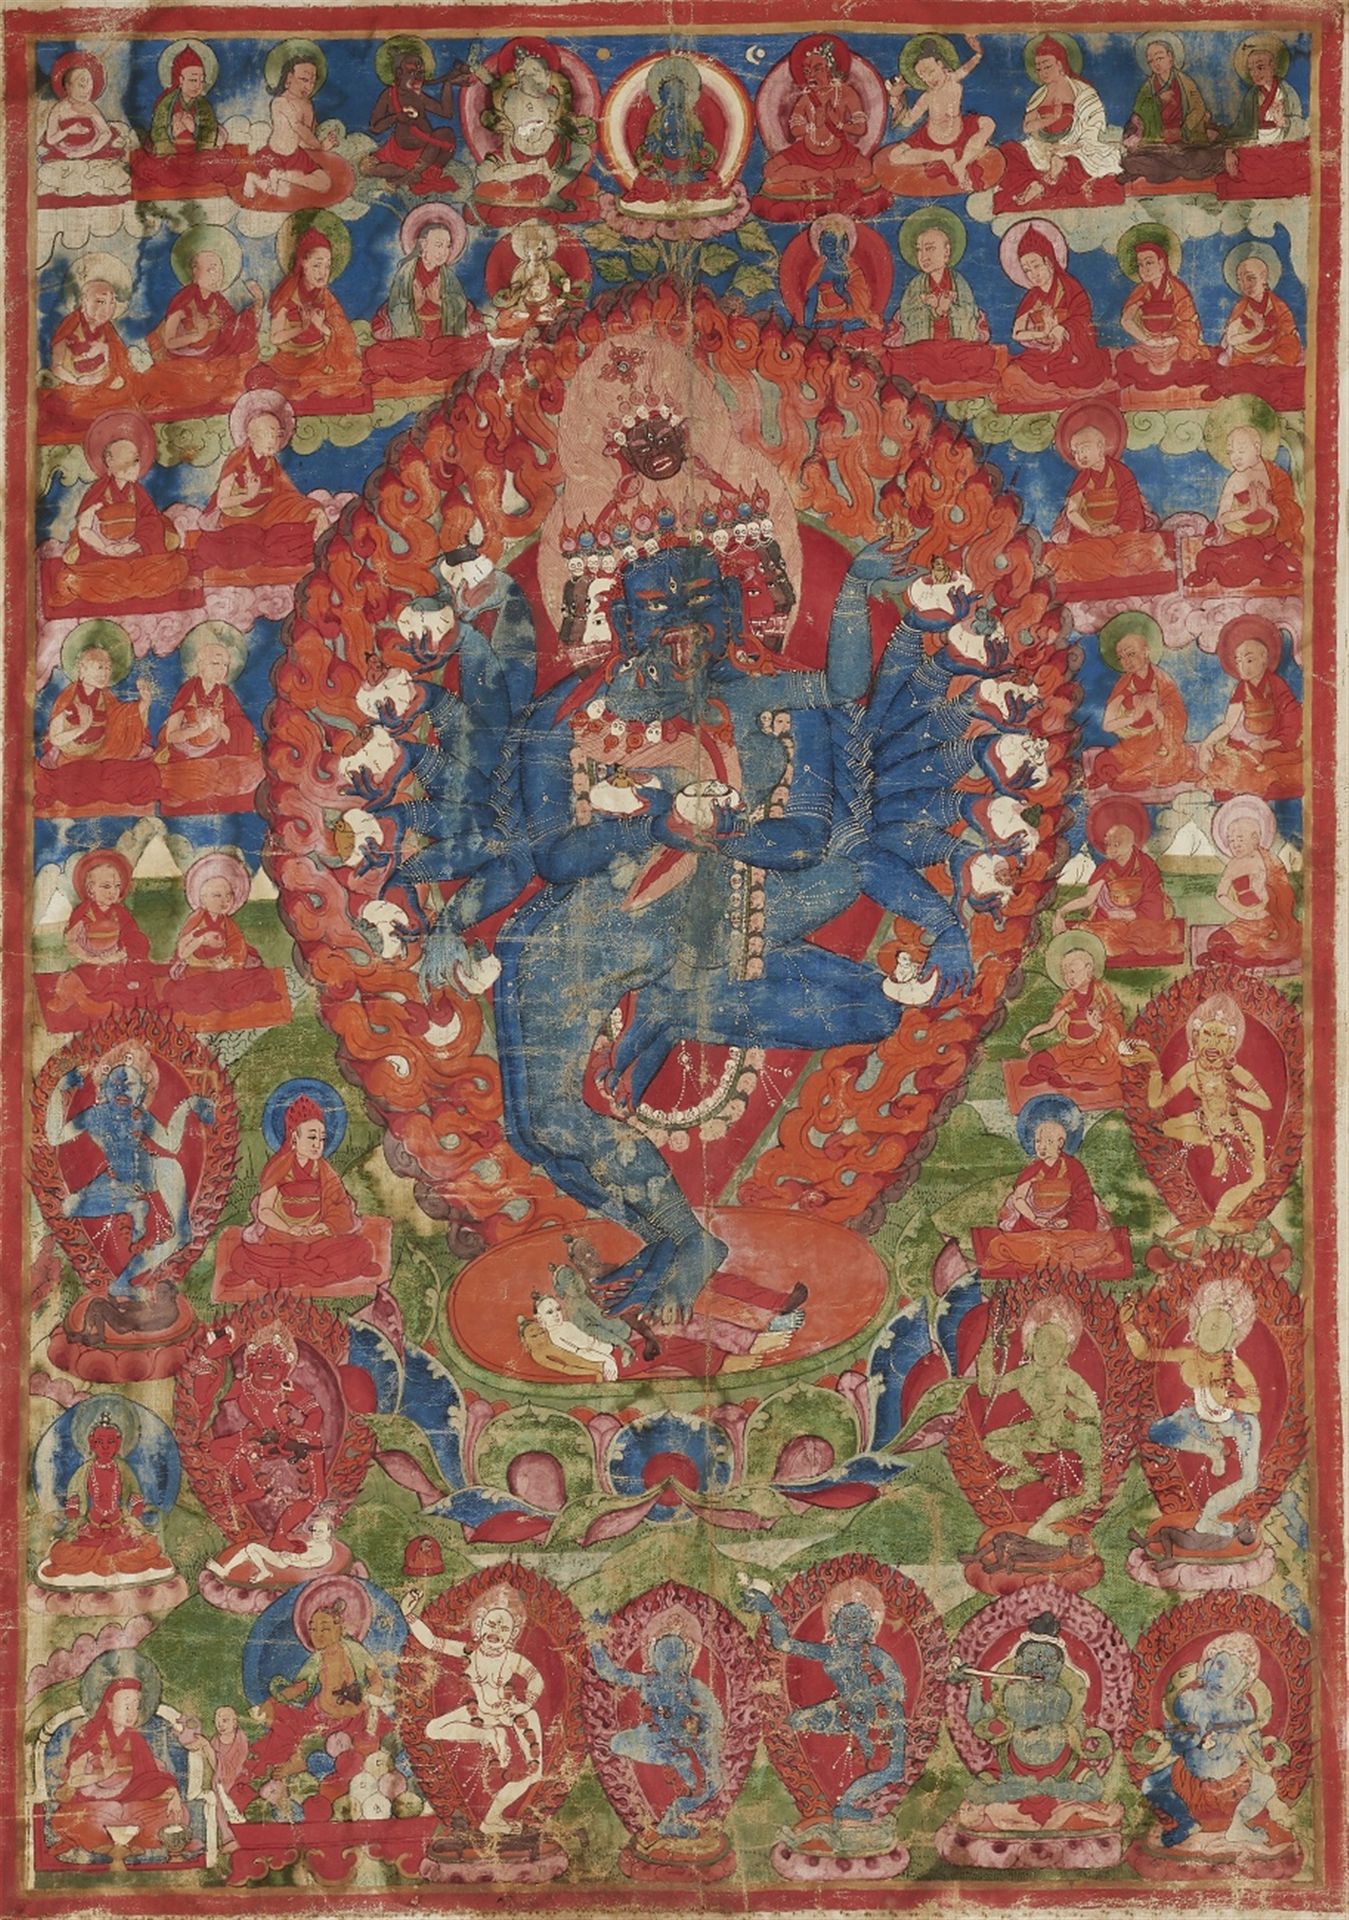 Null A magnificent Tibetan thangka of Hevajra and Nairatmya. 19th century



The&hellip;